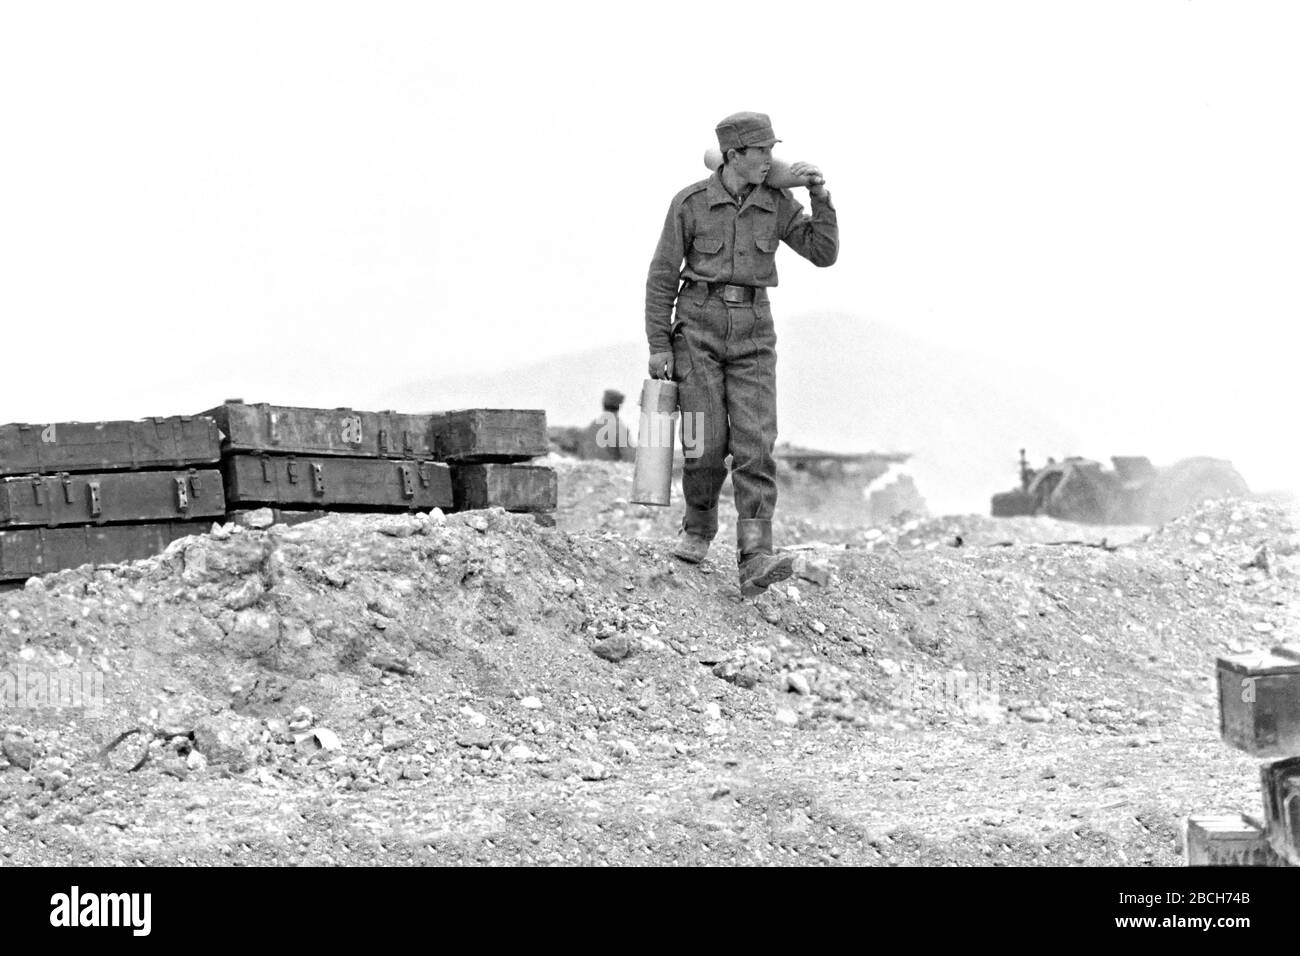 An Afghan soldier carries artillery rounds for a Soviet-made 122mm cannon at the Pagaman forward operating post May 1, 1989 in Pagaman, Afghanistan. The base protects a main entry point into the capital Kabul and is less than a mile from the Afghan mujahideen fighters front lines. Stock Photo